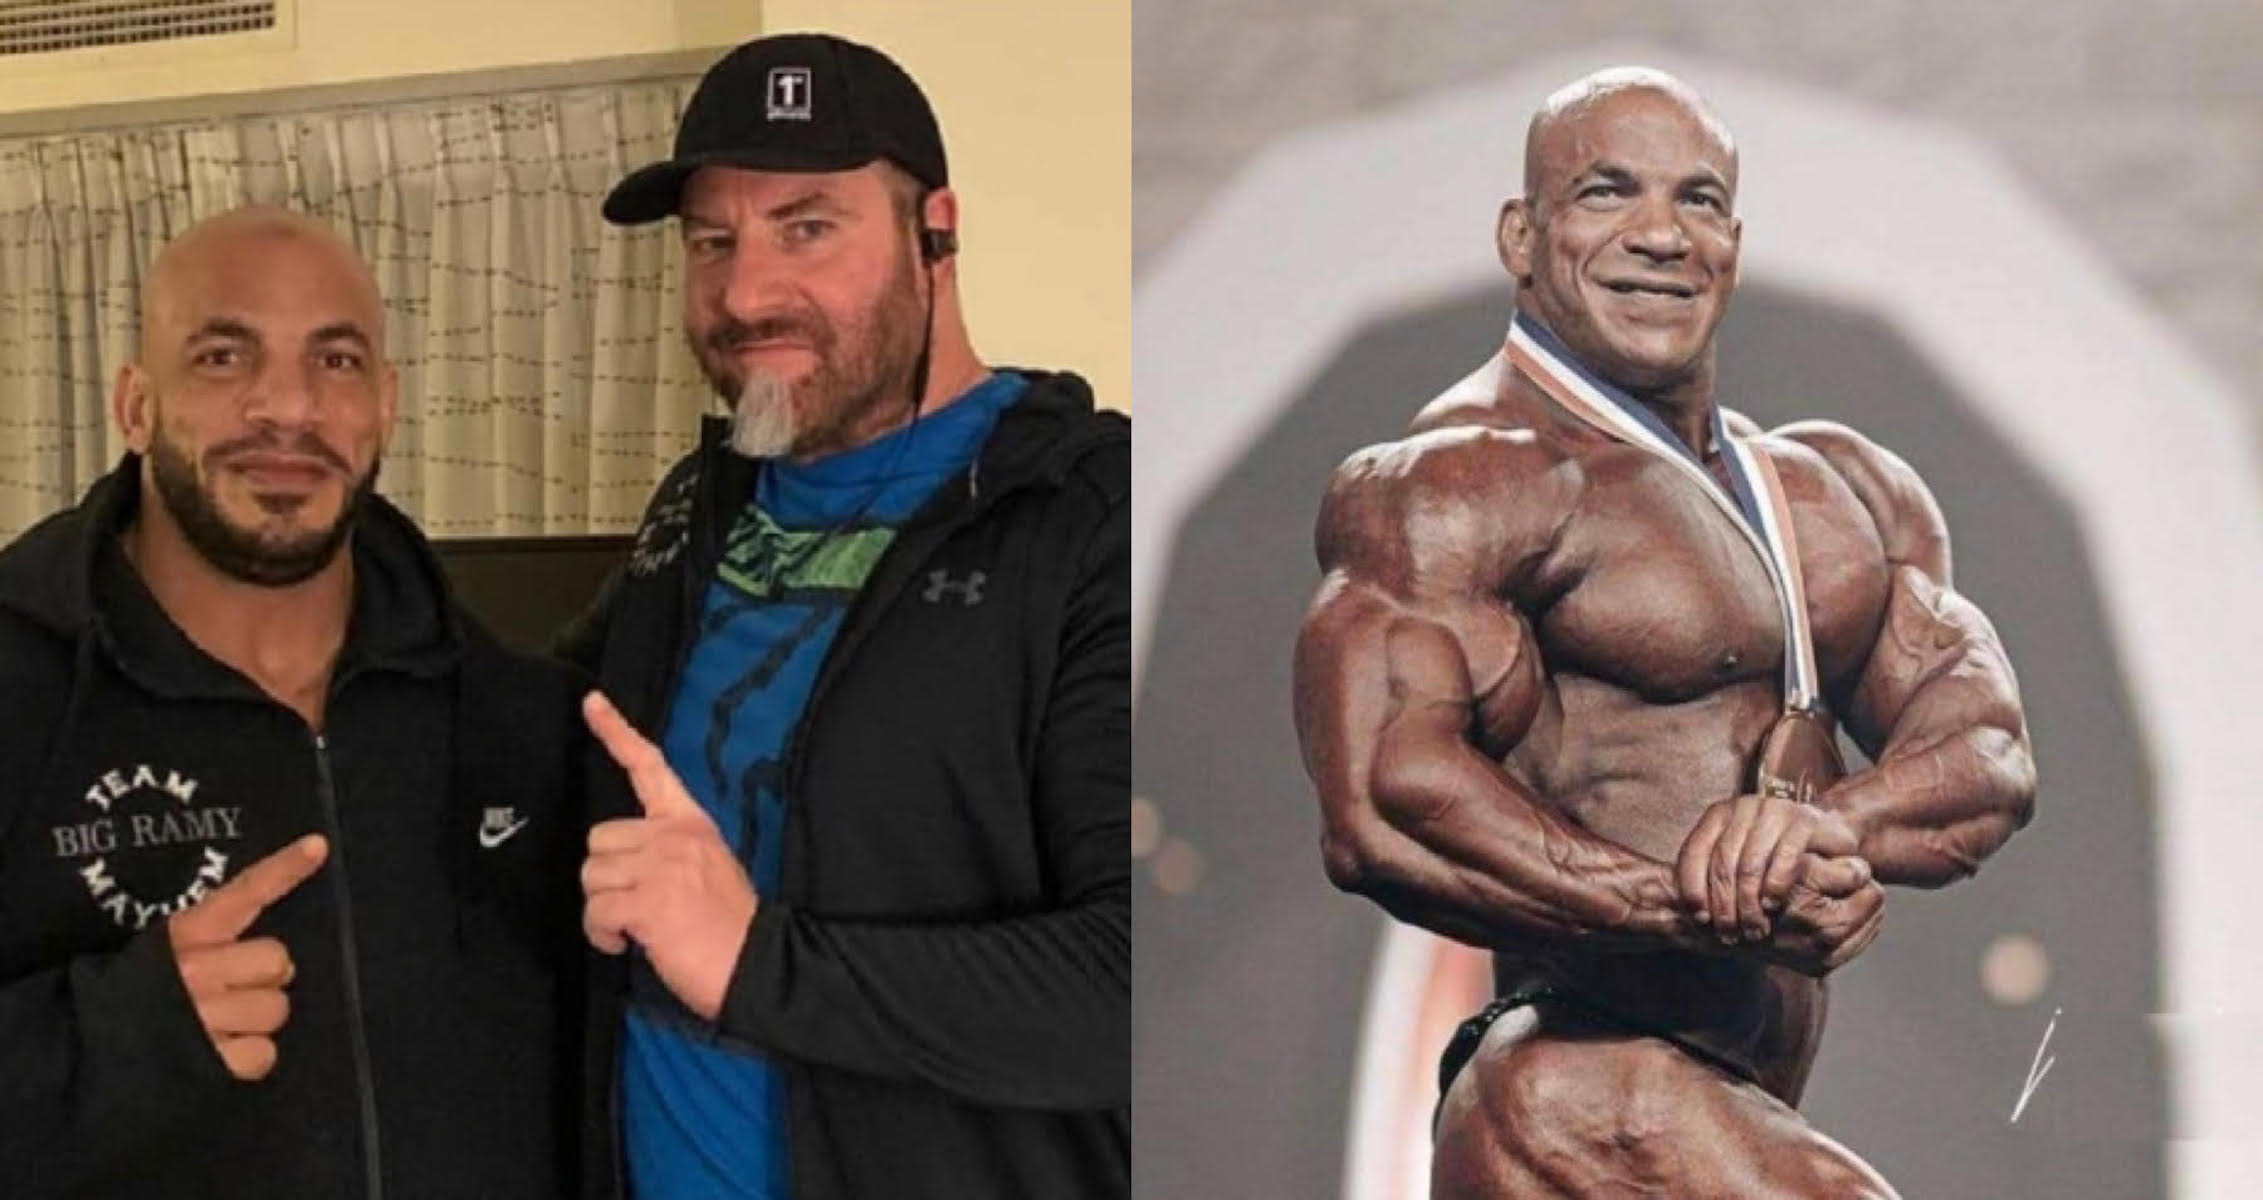 Chad Nicholls Believes Big Ramy Will Be Even Bigger At 2022 Olympia